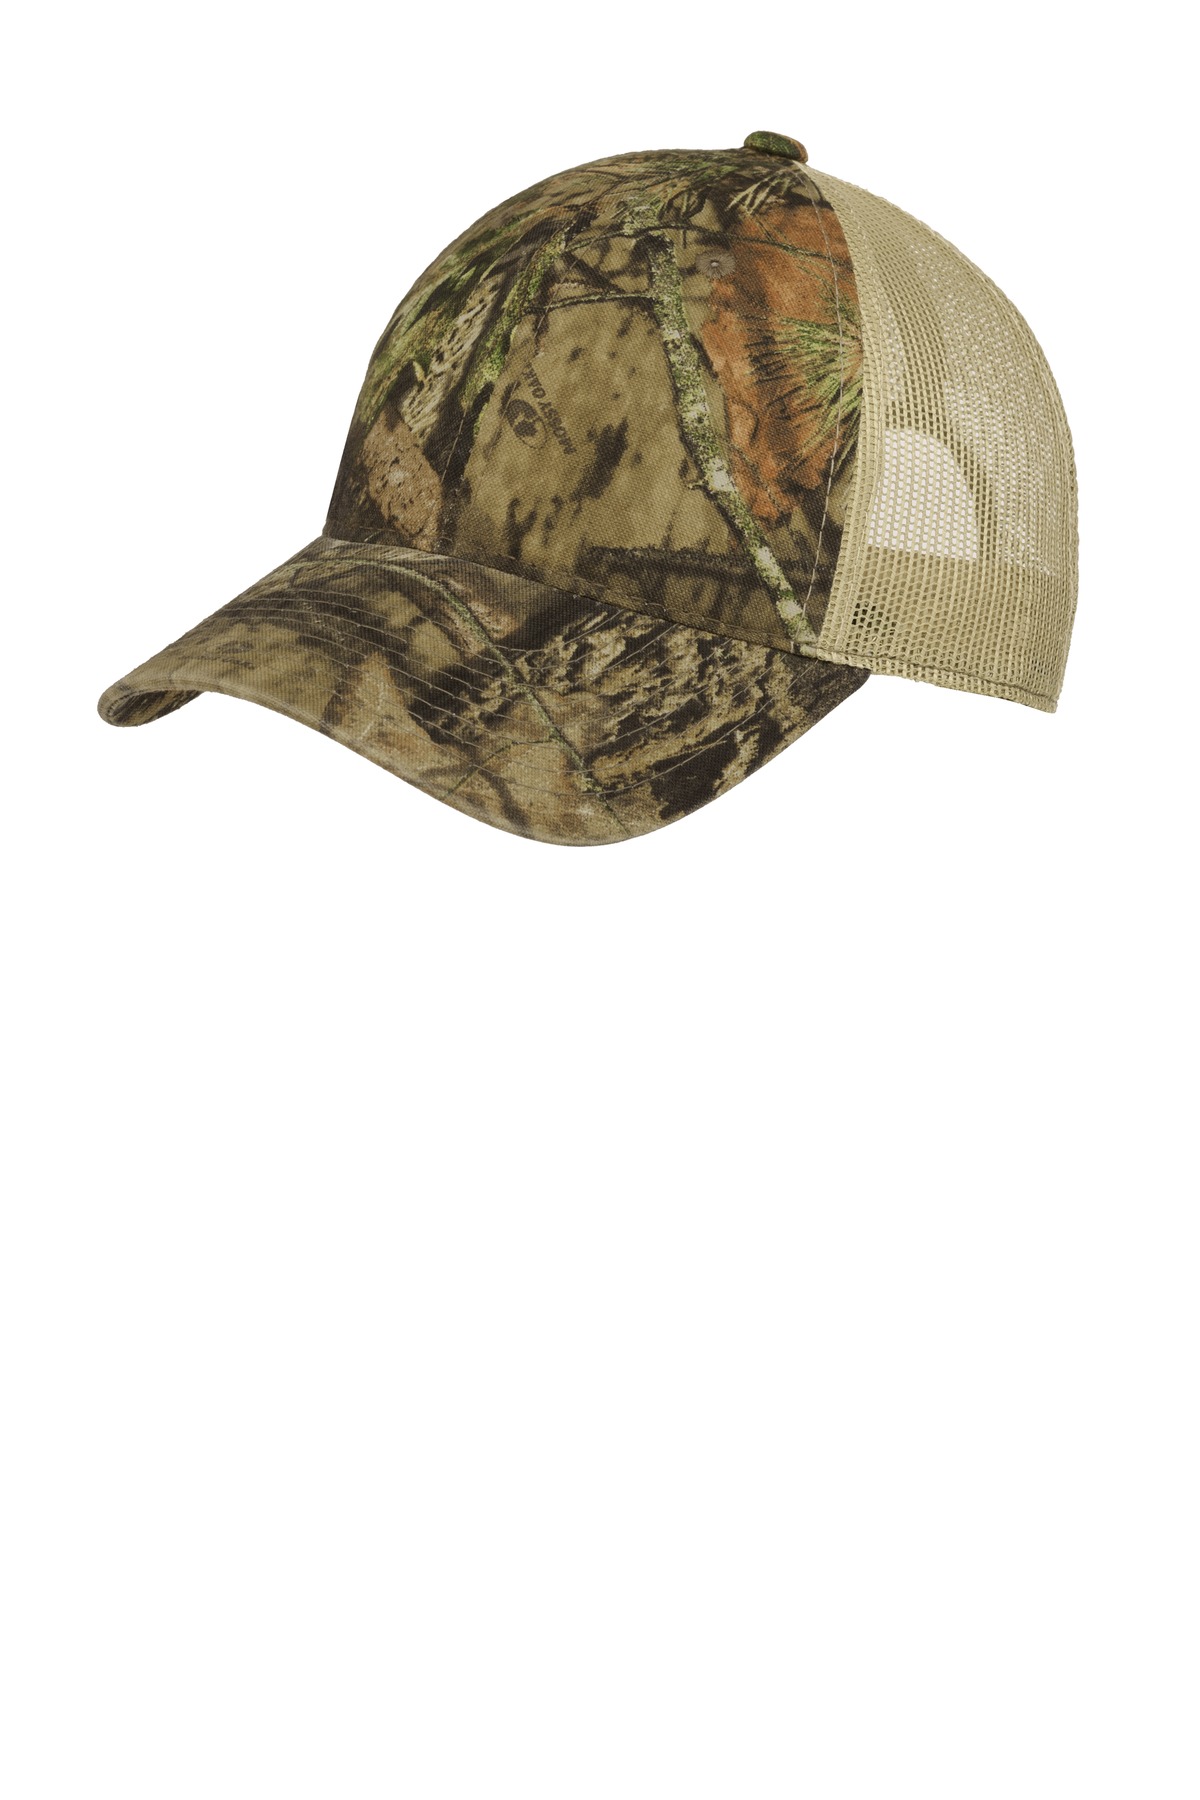 Port Authority Hospitality Caps ® Unstructured Camouflage Mesh Back Cap.-Port Authority